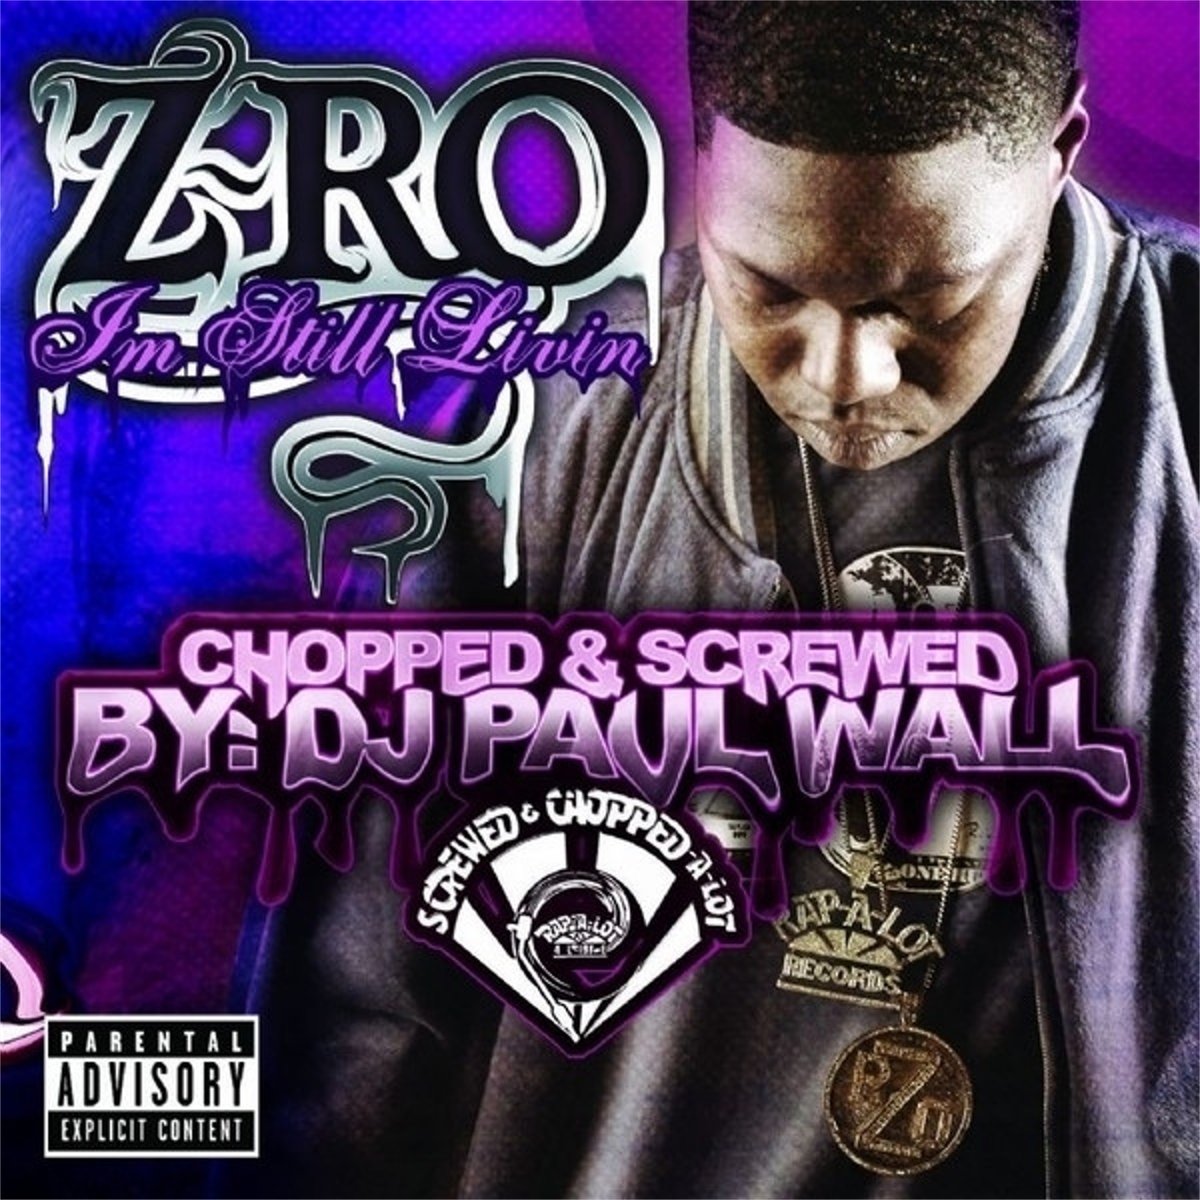 GYMC: The Remix Album - Chopped & Skrewed by Paul Wall